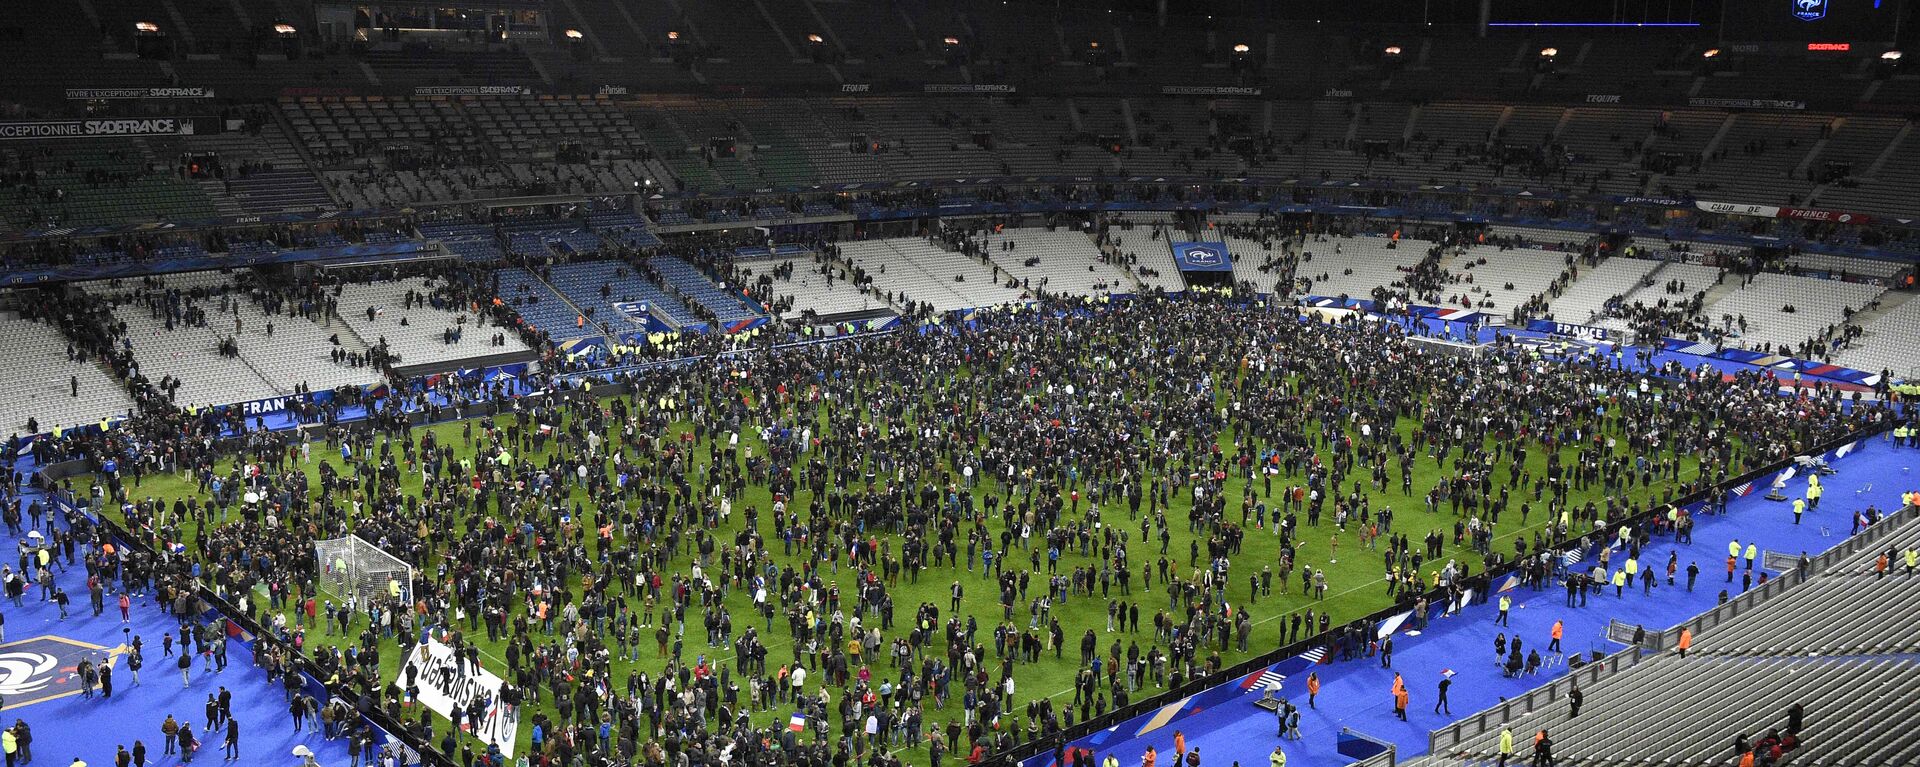 Spectators gather on the pitch of the Stade de France stadium following the friendly football match between France and Germany in Saint-Denis, north of Paris, on November 13, 2015, after a series of gun attacks occurred across Paris as well as explosions outside the national stadium where France was hosting Germany - Sputnik International, 1920, 28.05.2022